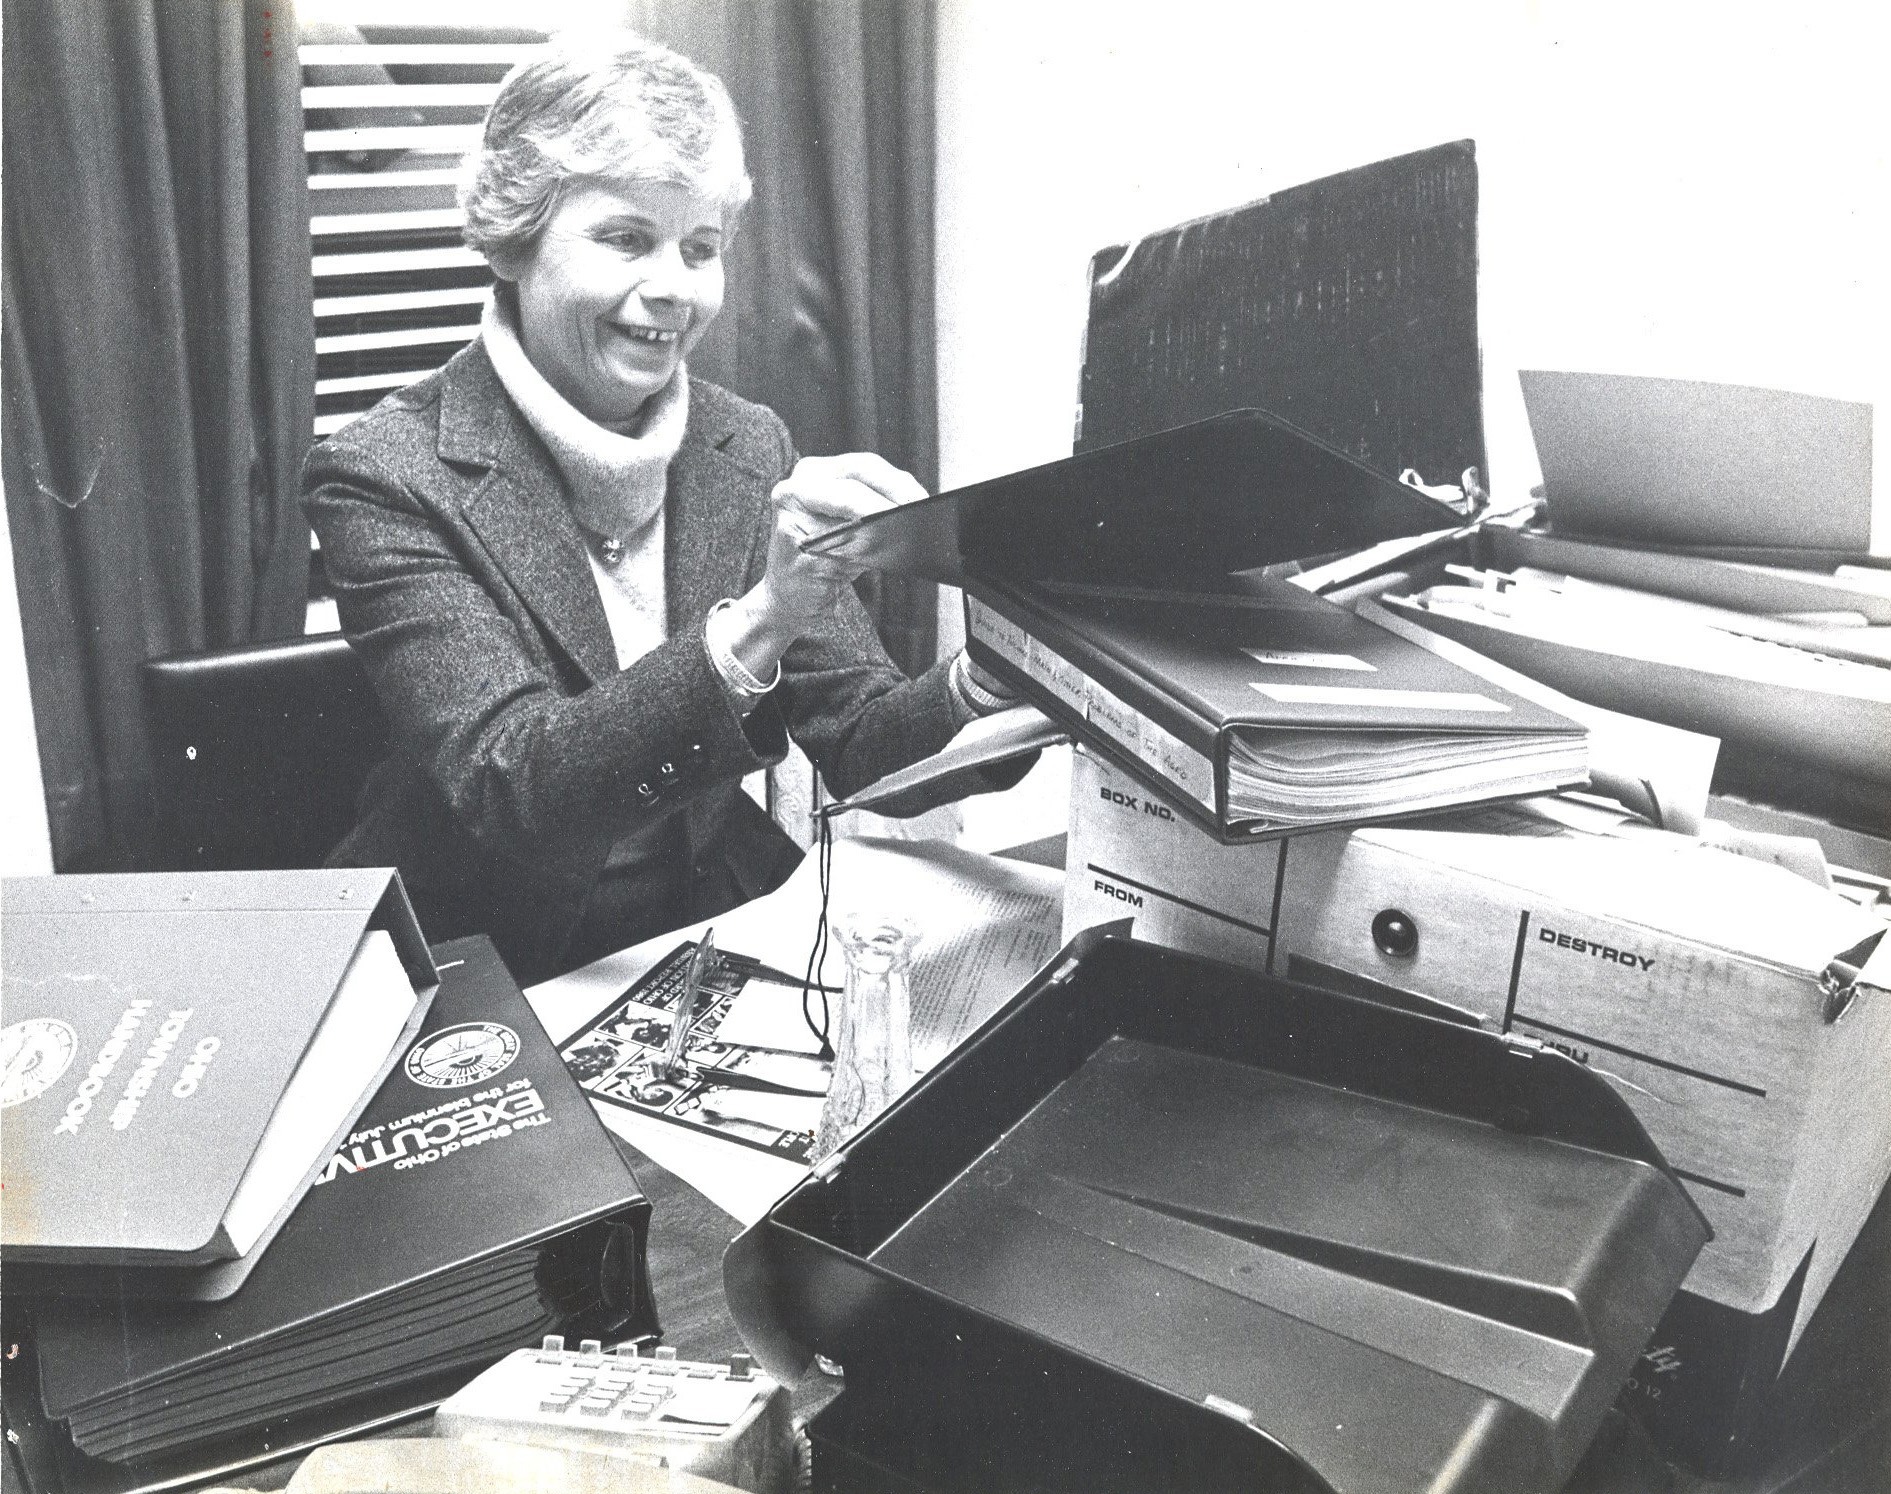 Davidson with books at desk